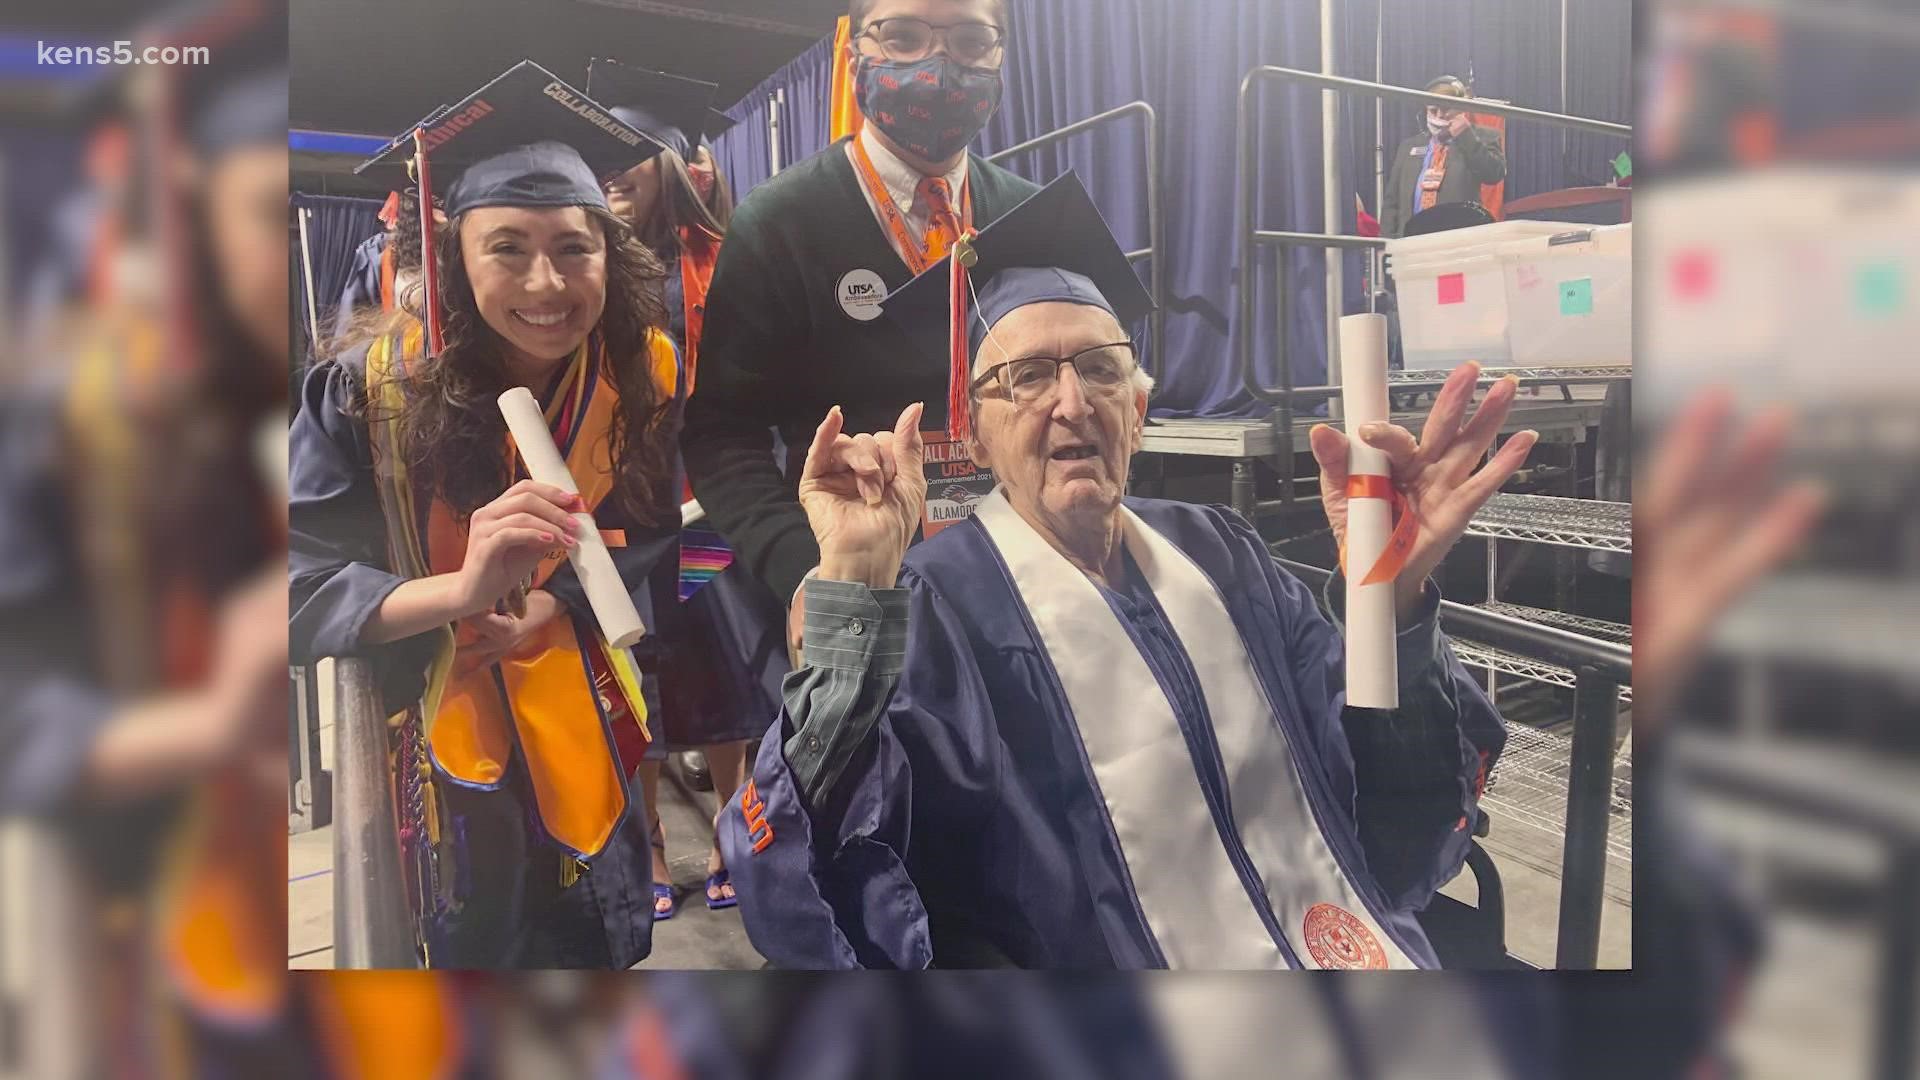 Not only did Melanie Salazar walk across the stage to receive her diploma, but she pushed her 87-year-old grandfather in a wheelchair so he could get his, too.